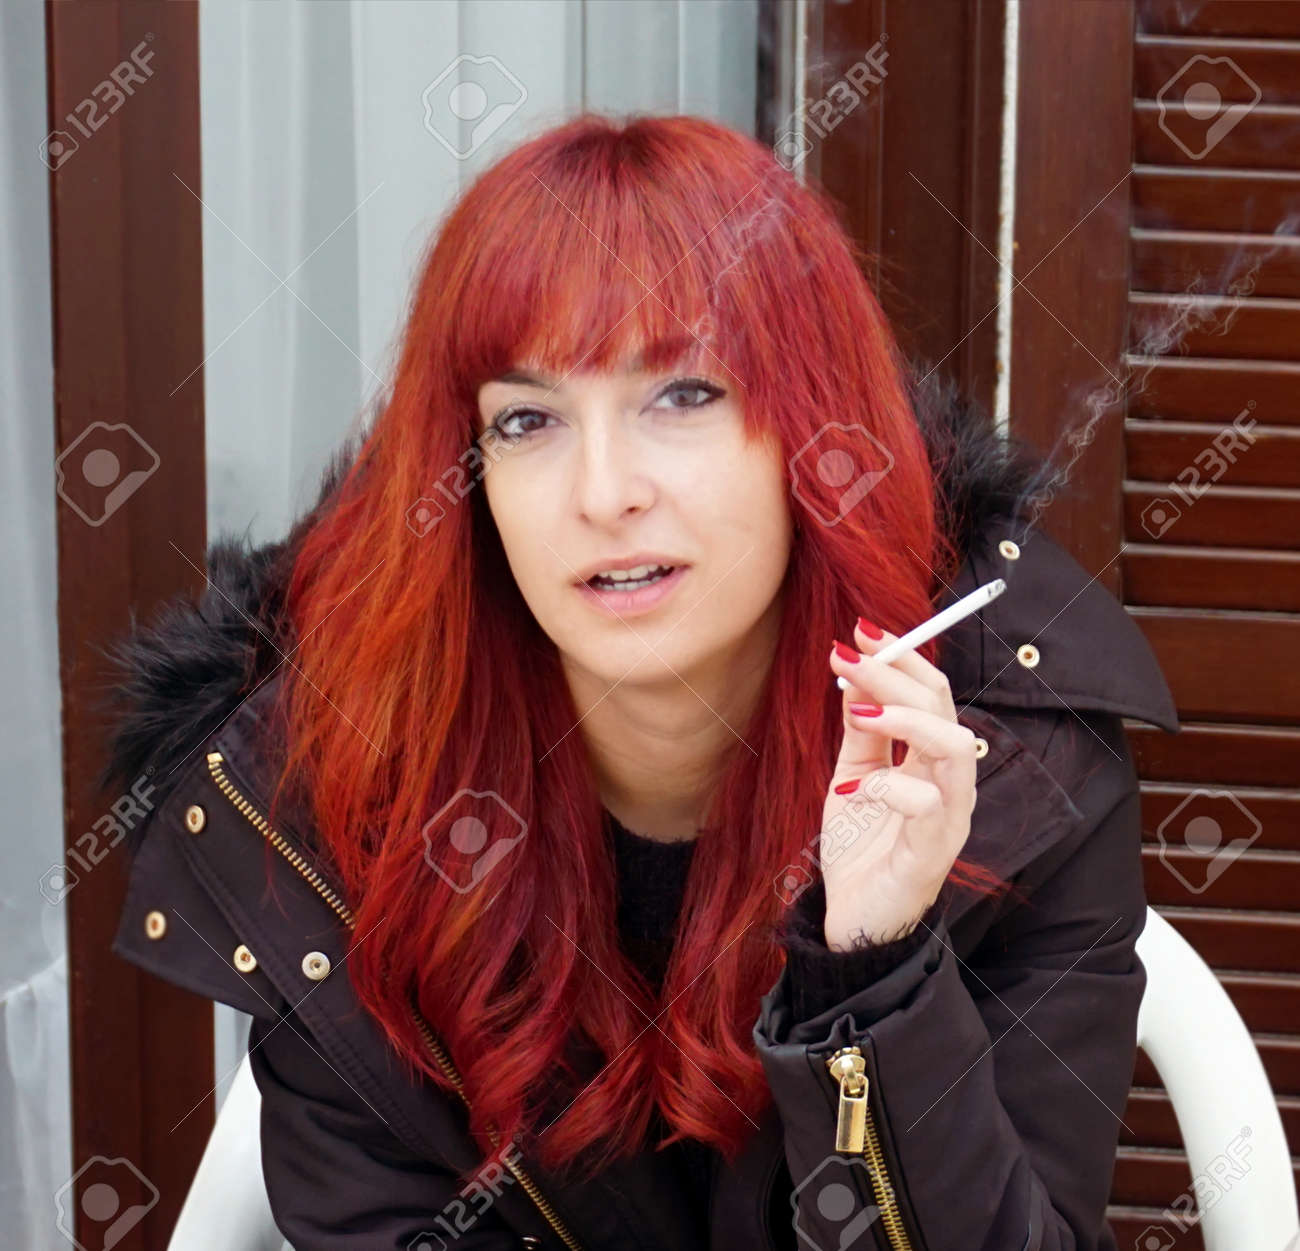 dianne marfega add red headed woman with a cigarette photo